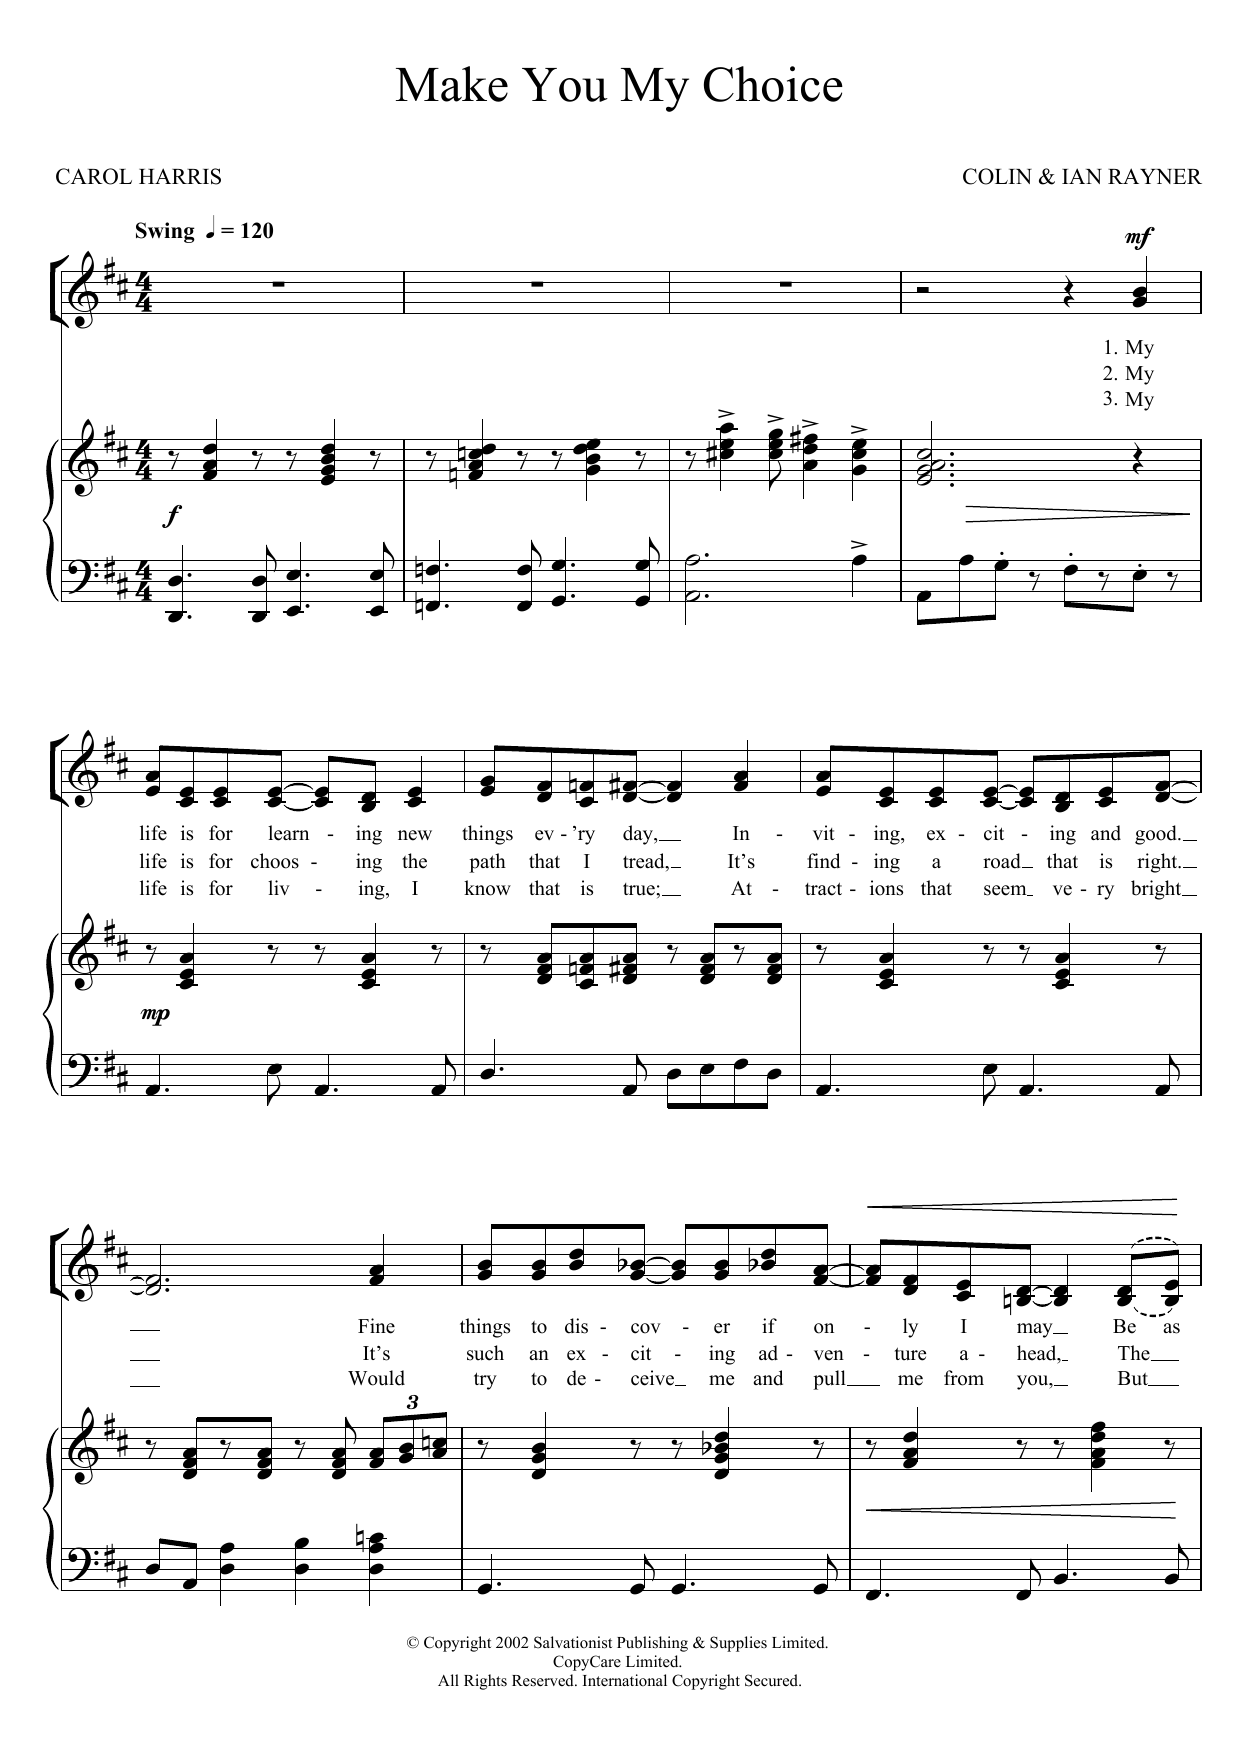 Download The Salvation Army Make You My Choice Sheet Music